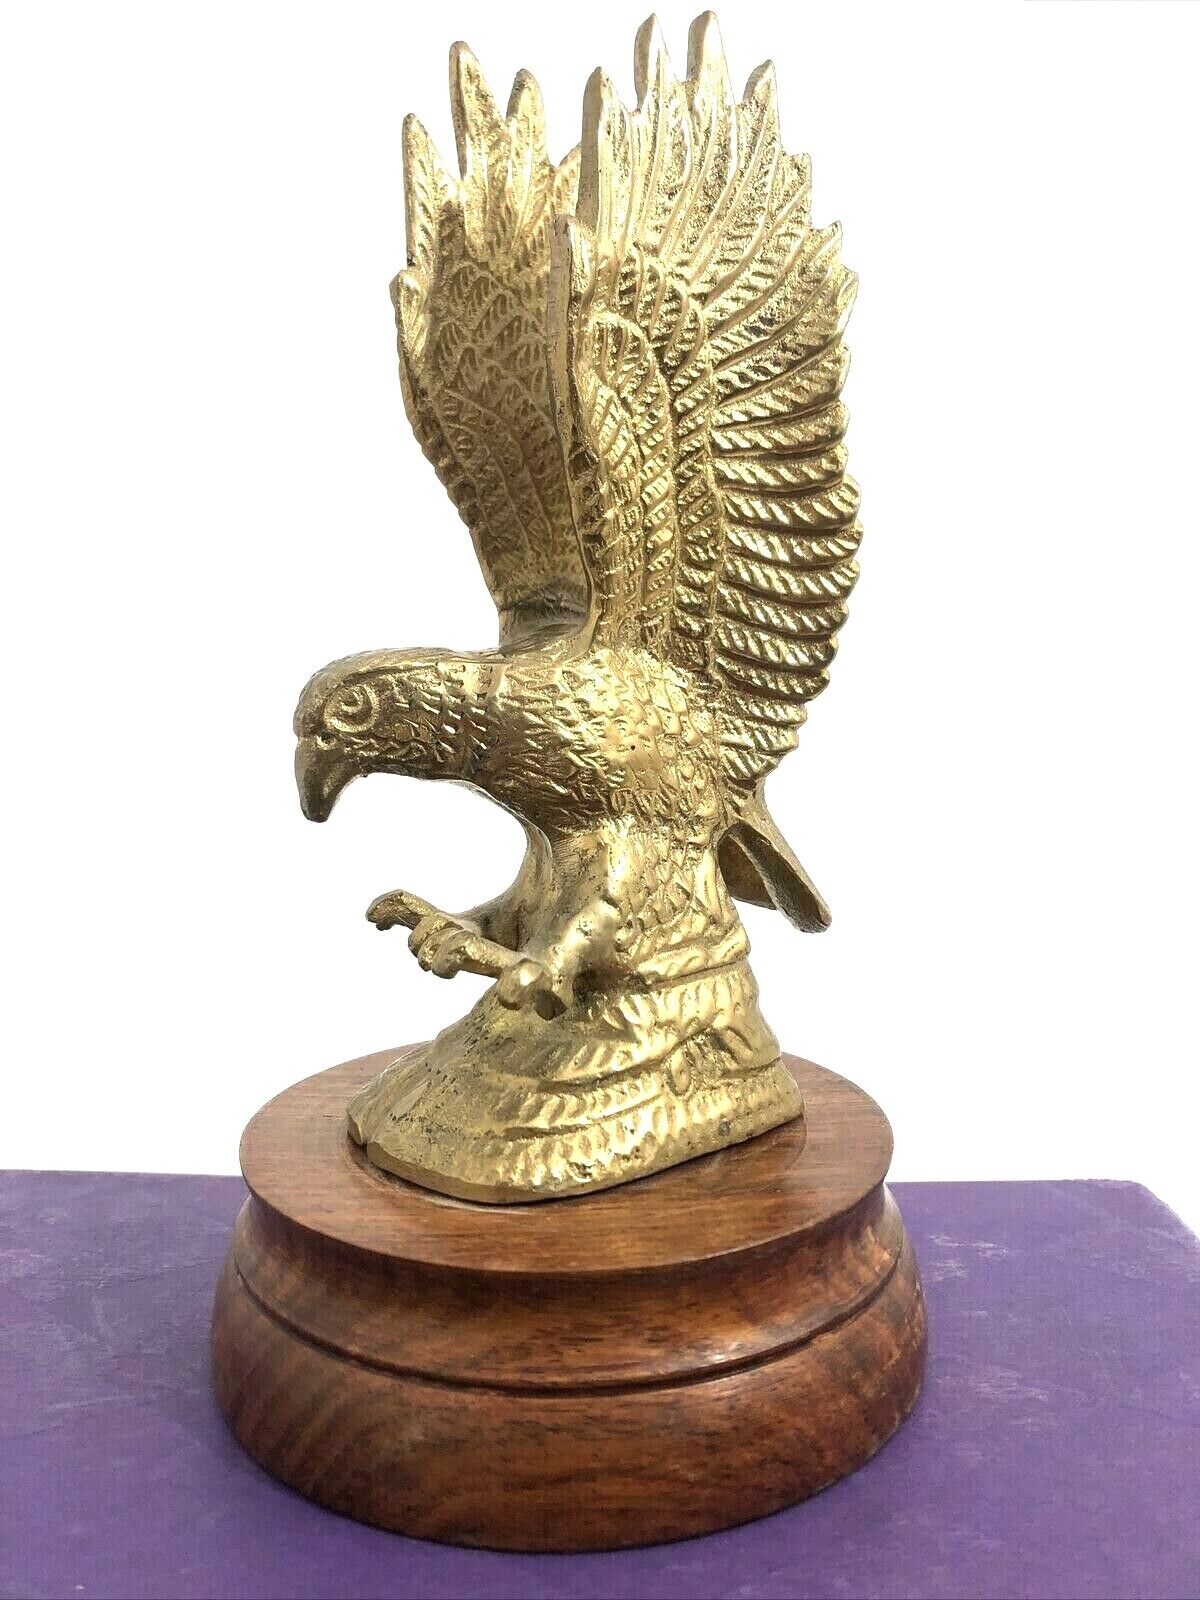 PAPERWEIGHT SOLID BRASS EAGLE ON WOOD STAND HEAVY SCULPTURE 7\